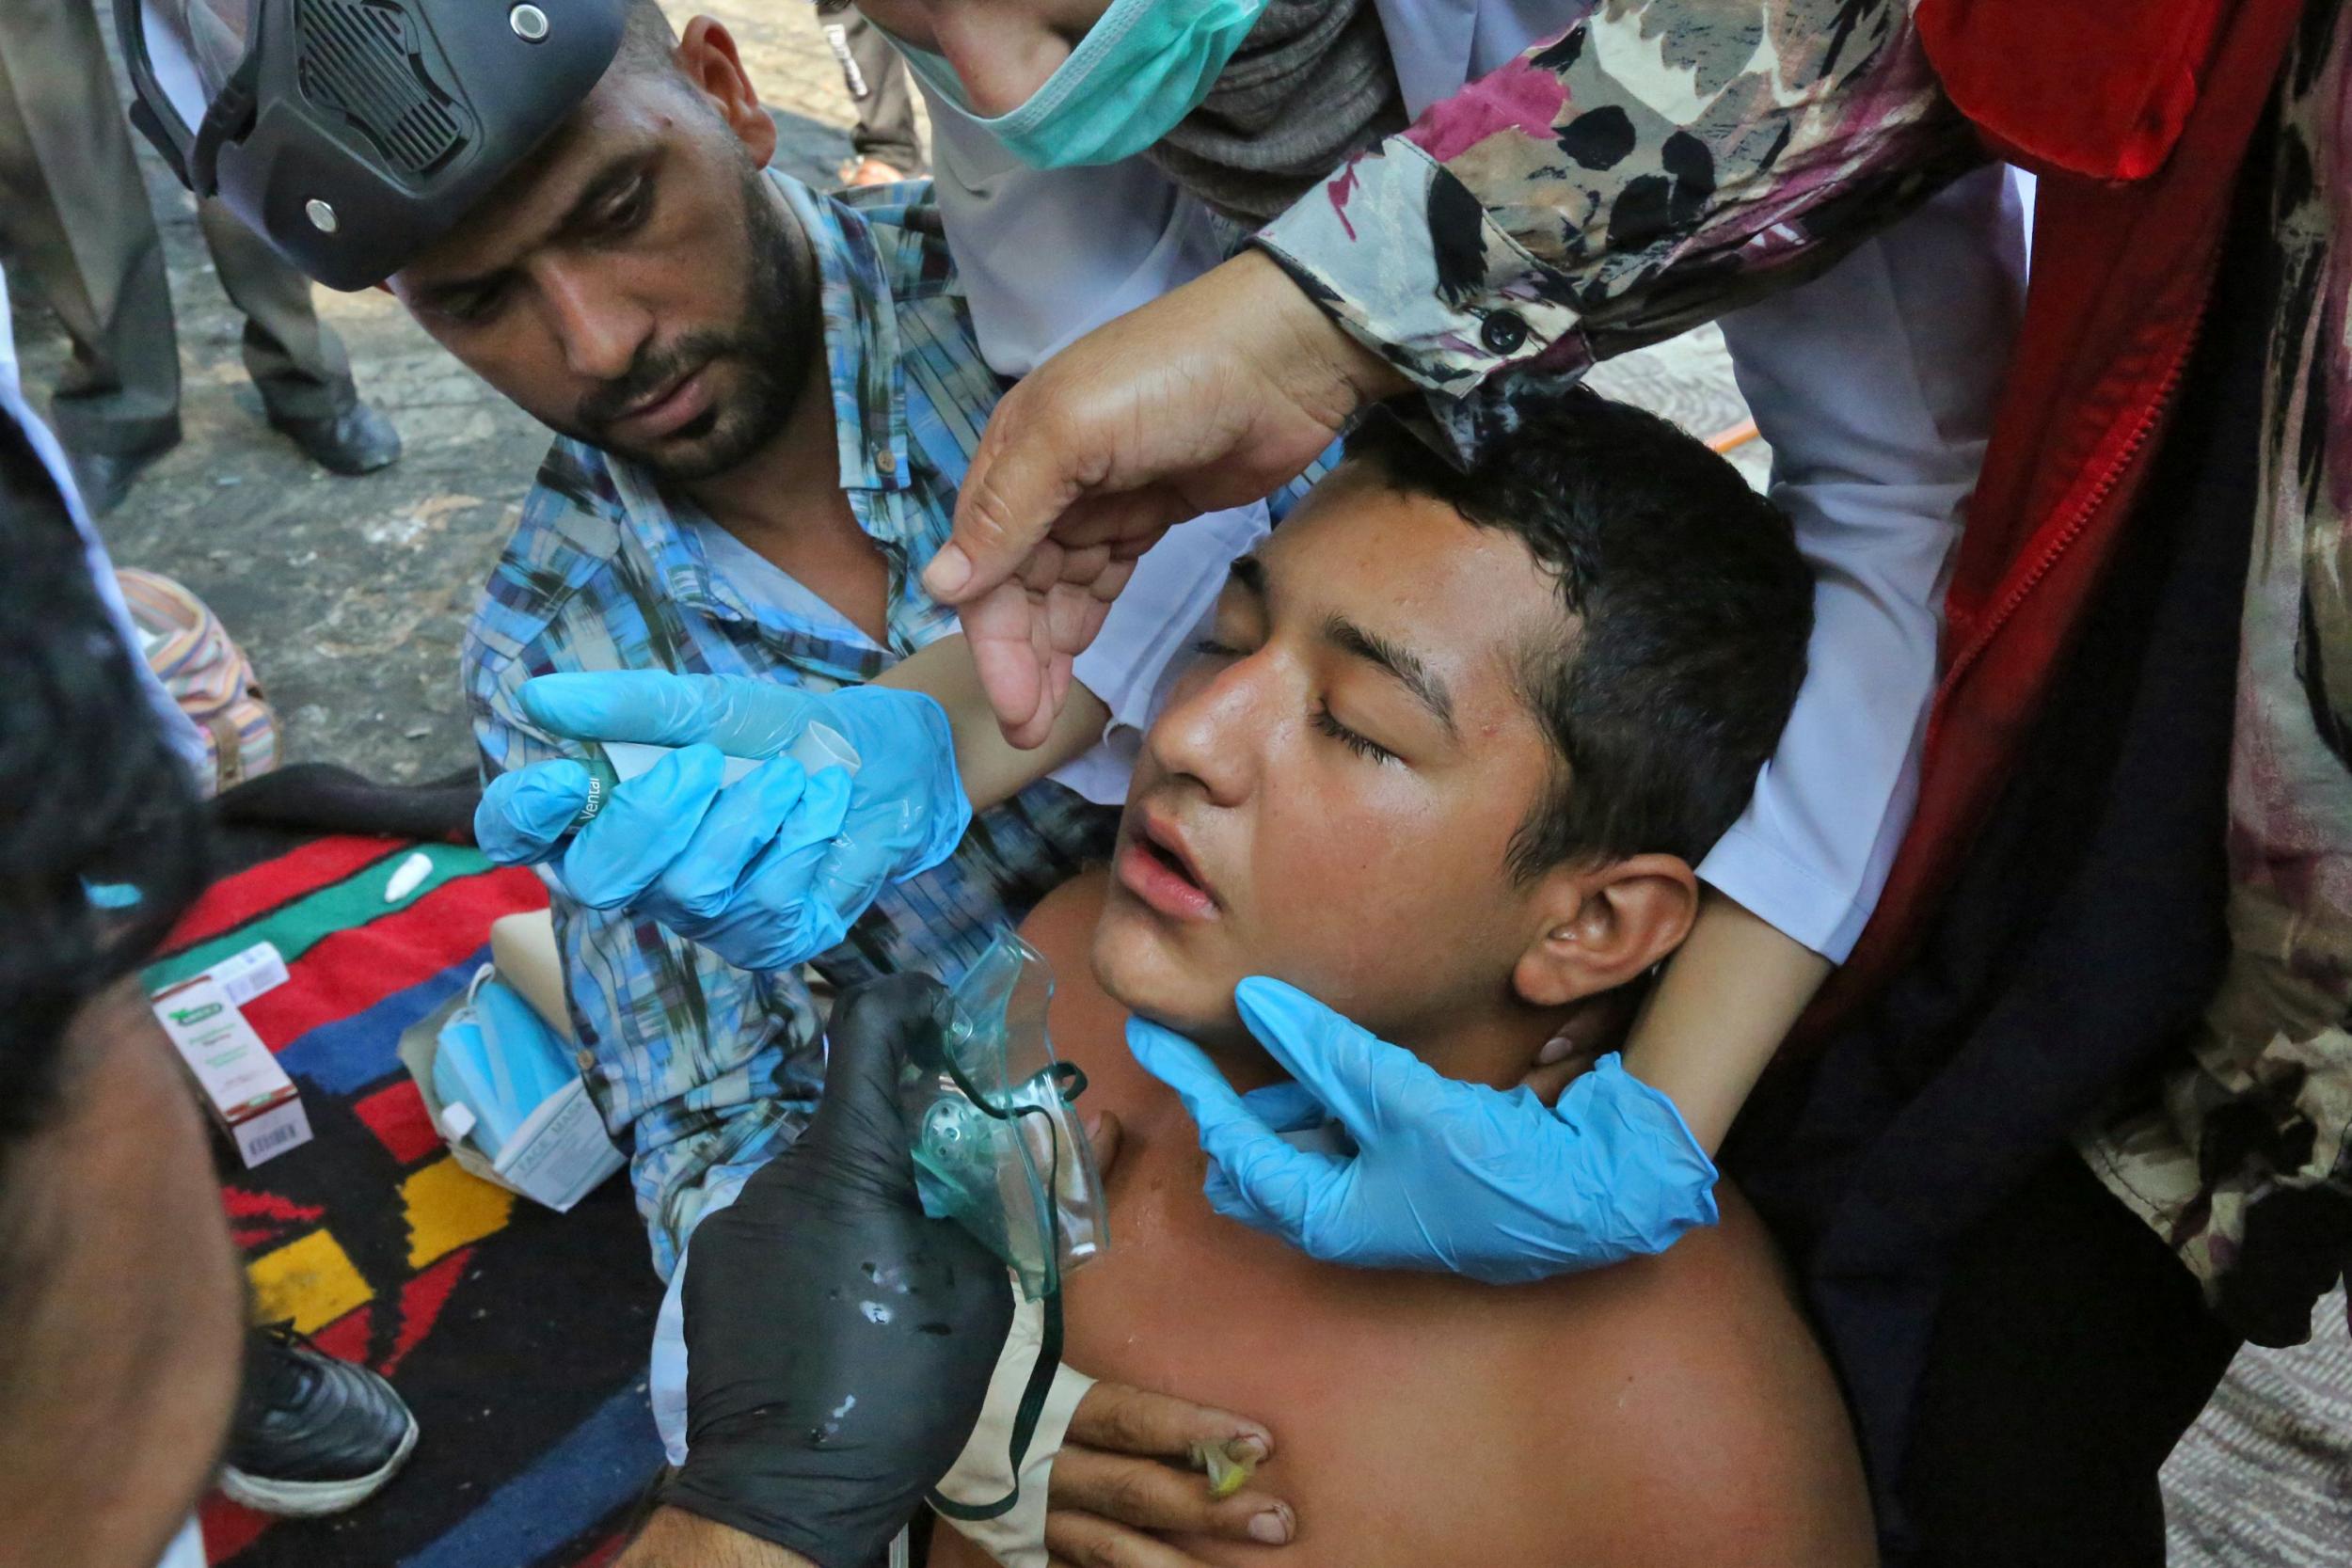 Iraqi protesters are treated for wounds during anti-government demonstrations in Tahrir square in the capital Baghdad on